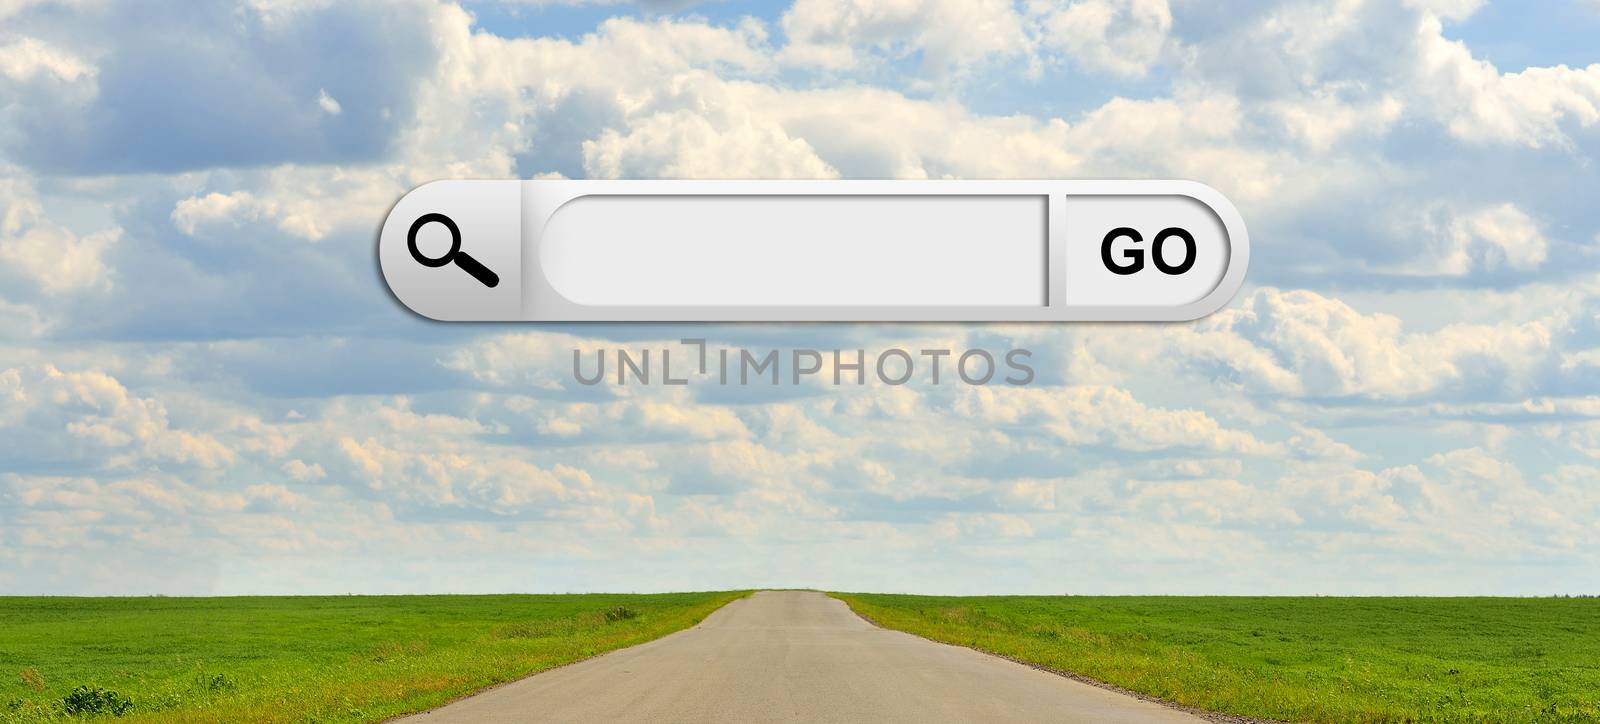 Human hand indicates the search bar in browser. Green grass, road and clouds on background